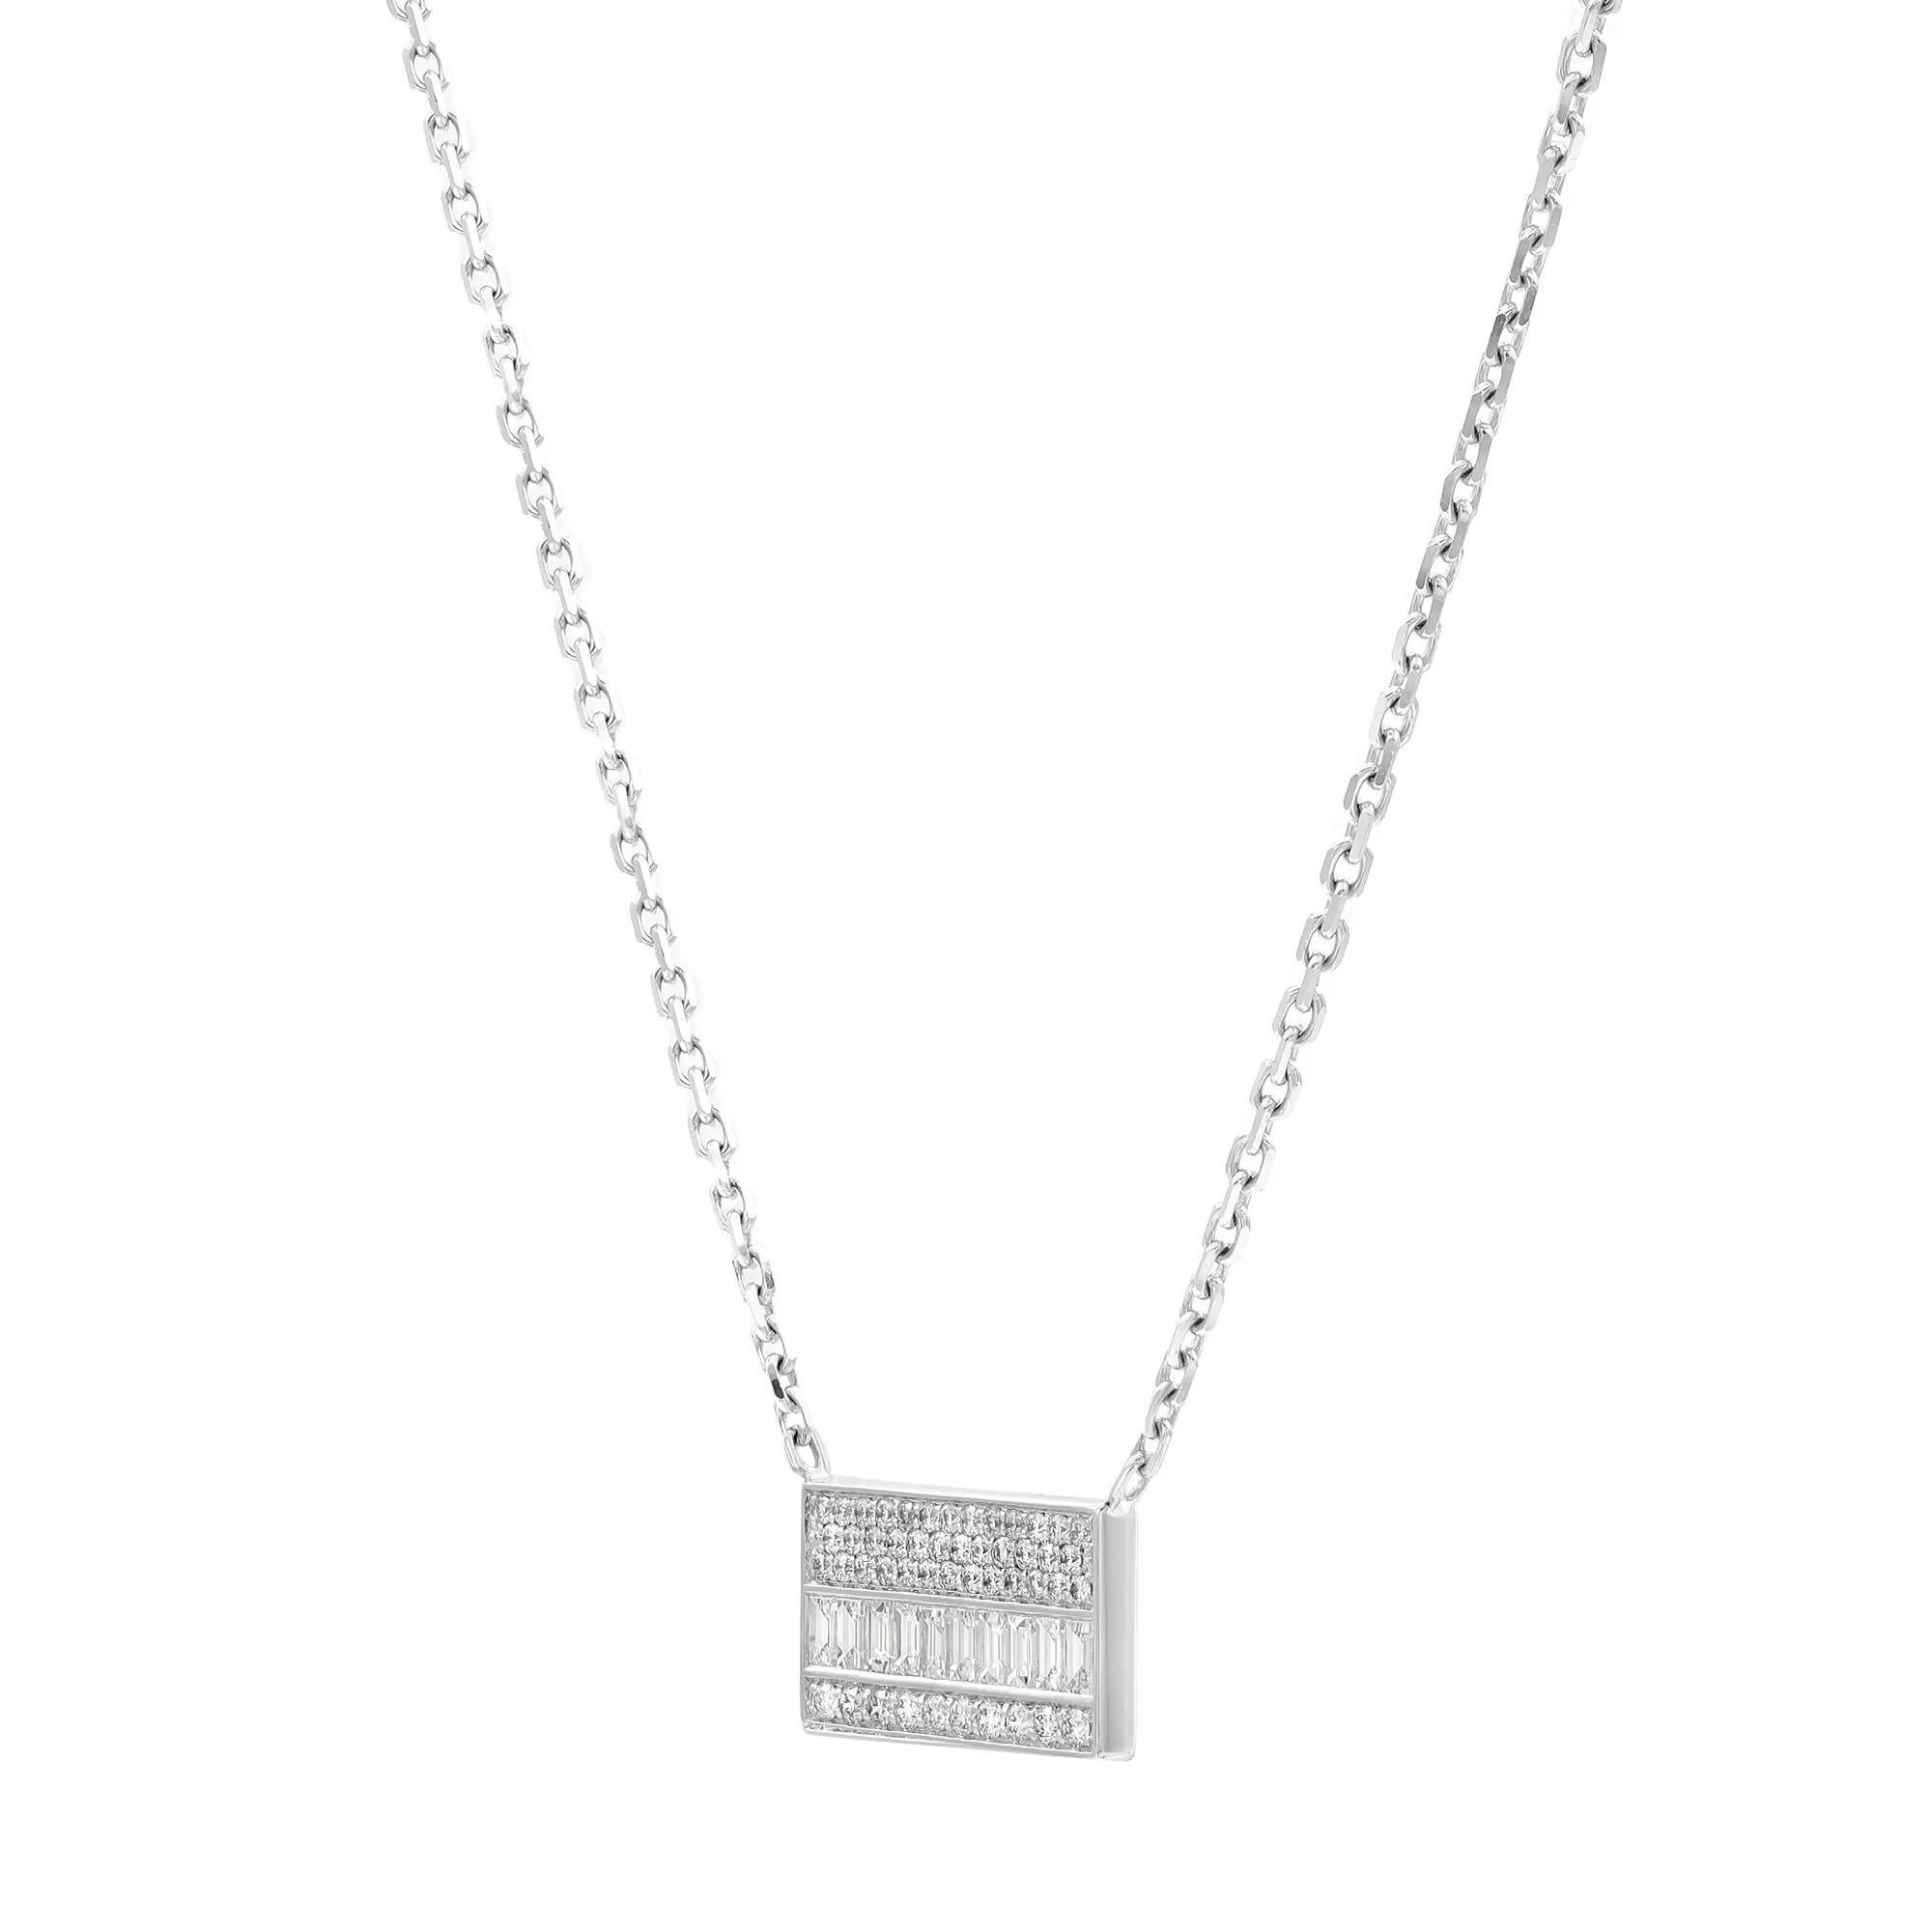 Messika 0.72Cttw Liz Diamond Pendant Chain Necklace 18K White Gold 17 Inches In New Condition For Sale In New York, NY